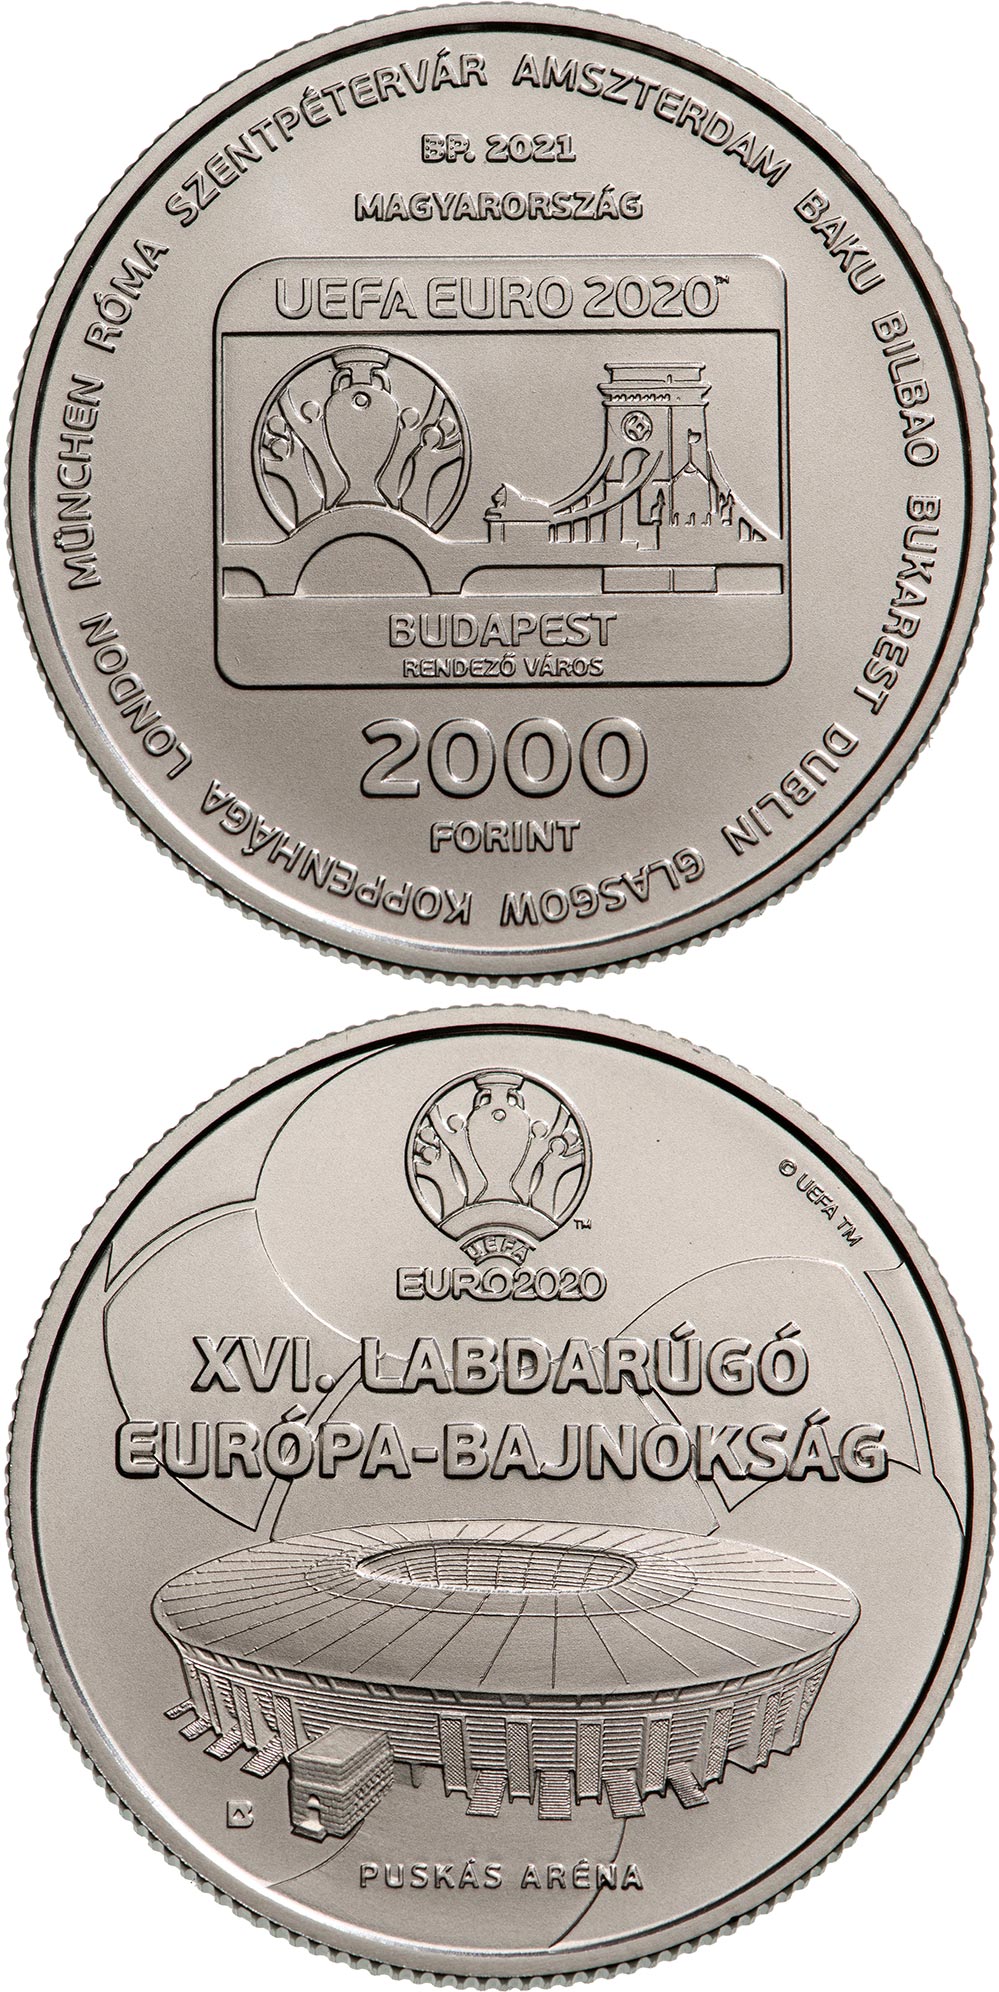 Image of 2000 forint coin - UEFA EURO 2020 | Hungary 2021.  The Copper–Nickel (CuNi) coin is of BU quality.